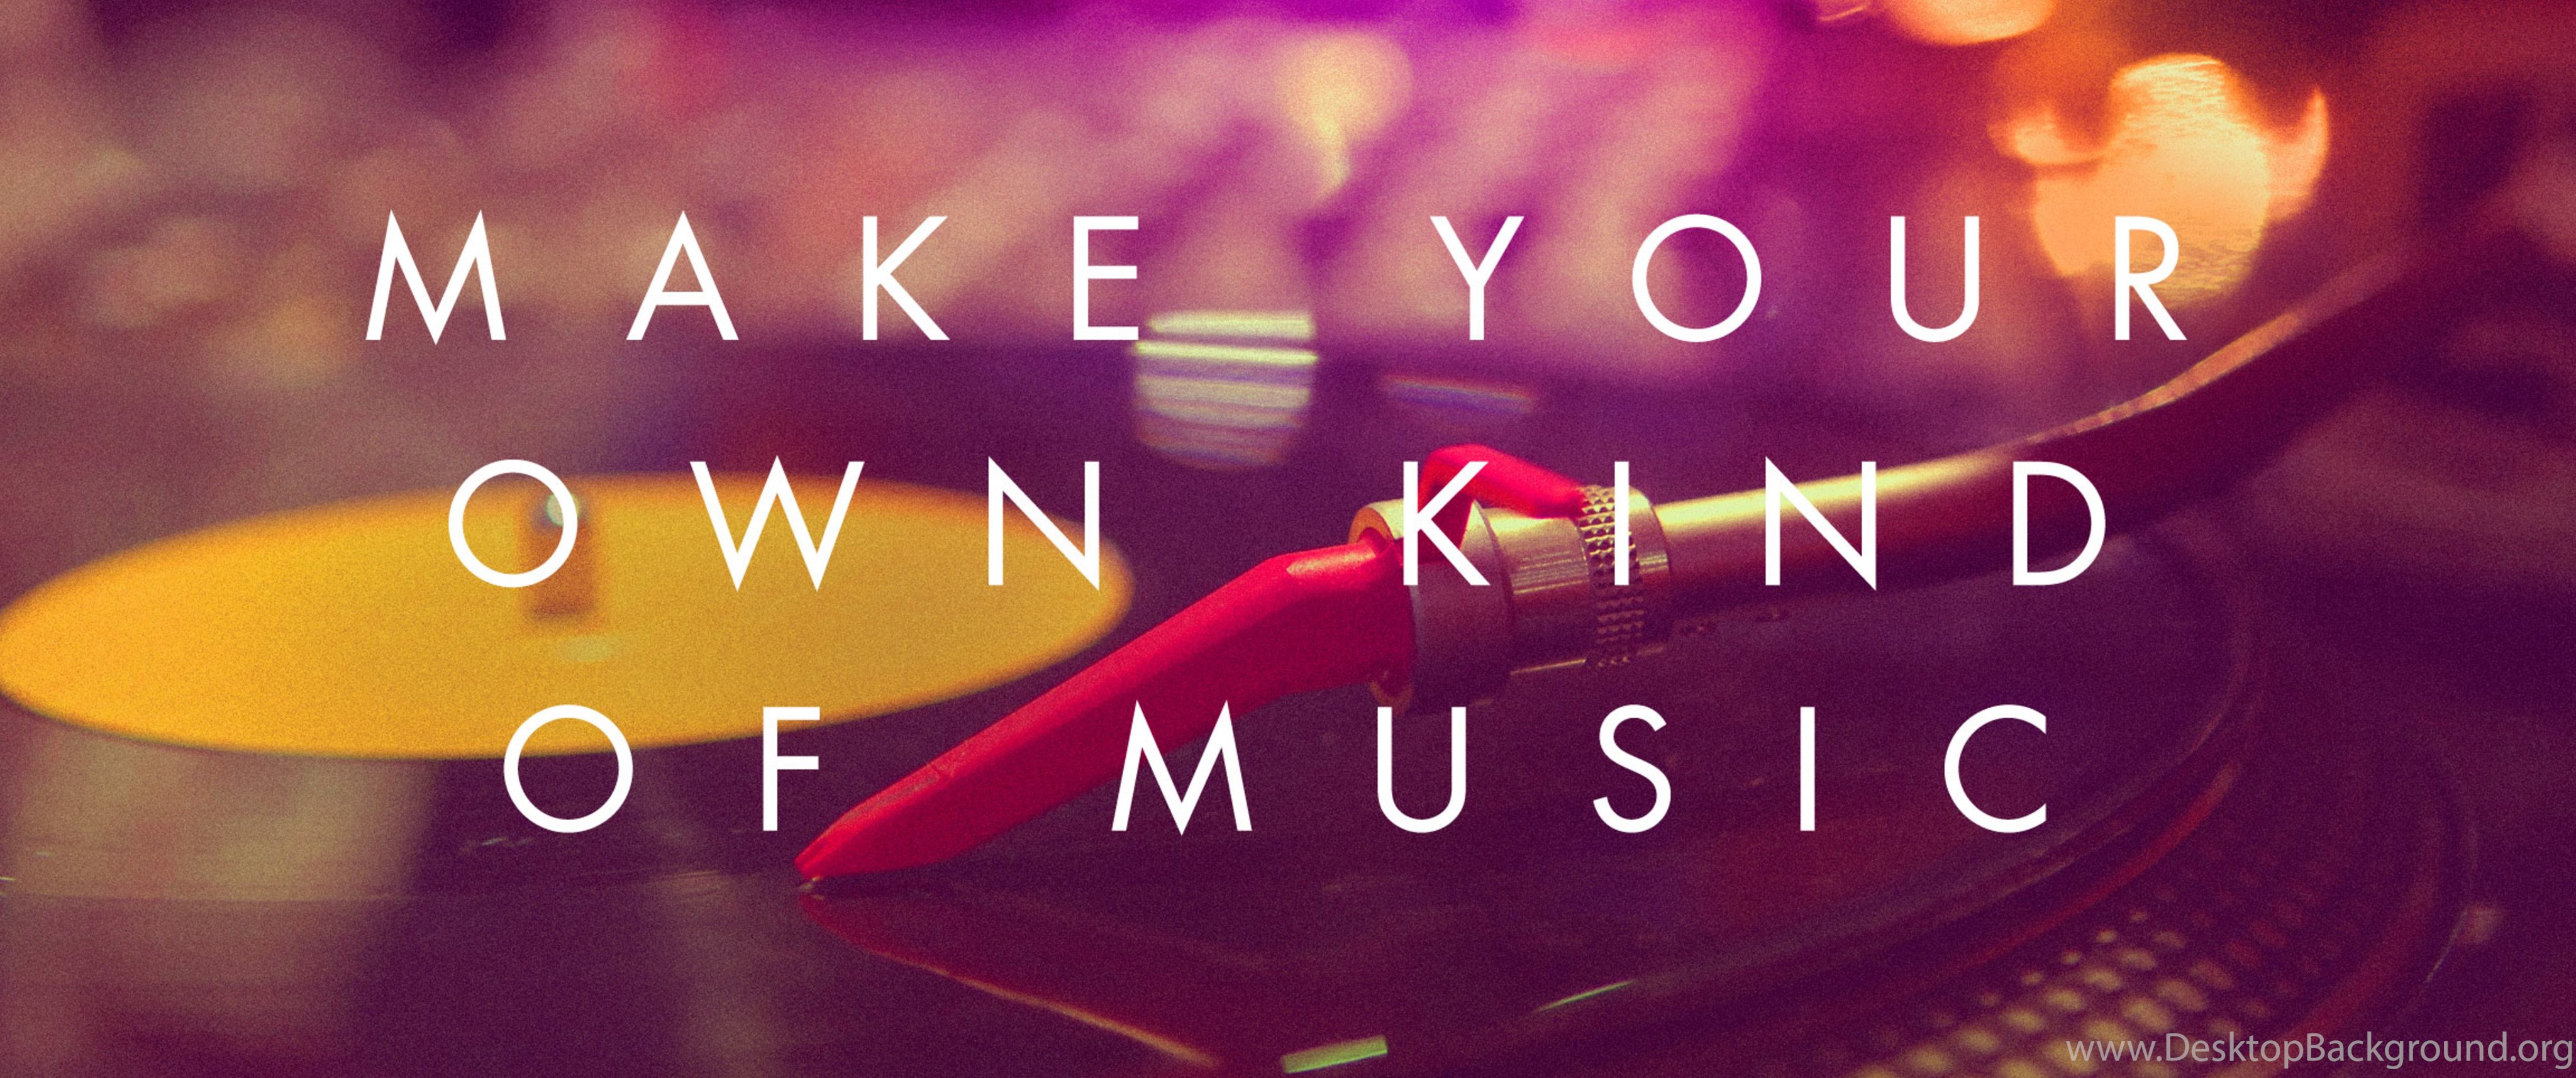 36 music. Make your own kind of Music обложка. Make your own kind of Music. Make your own kind of Music Lost.